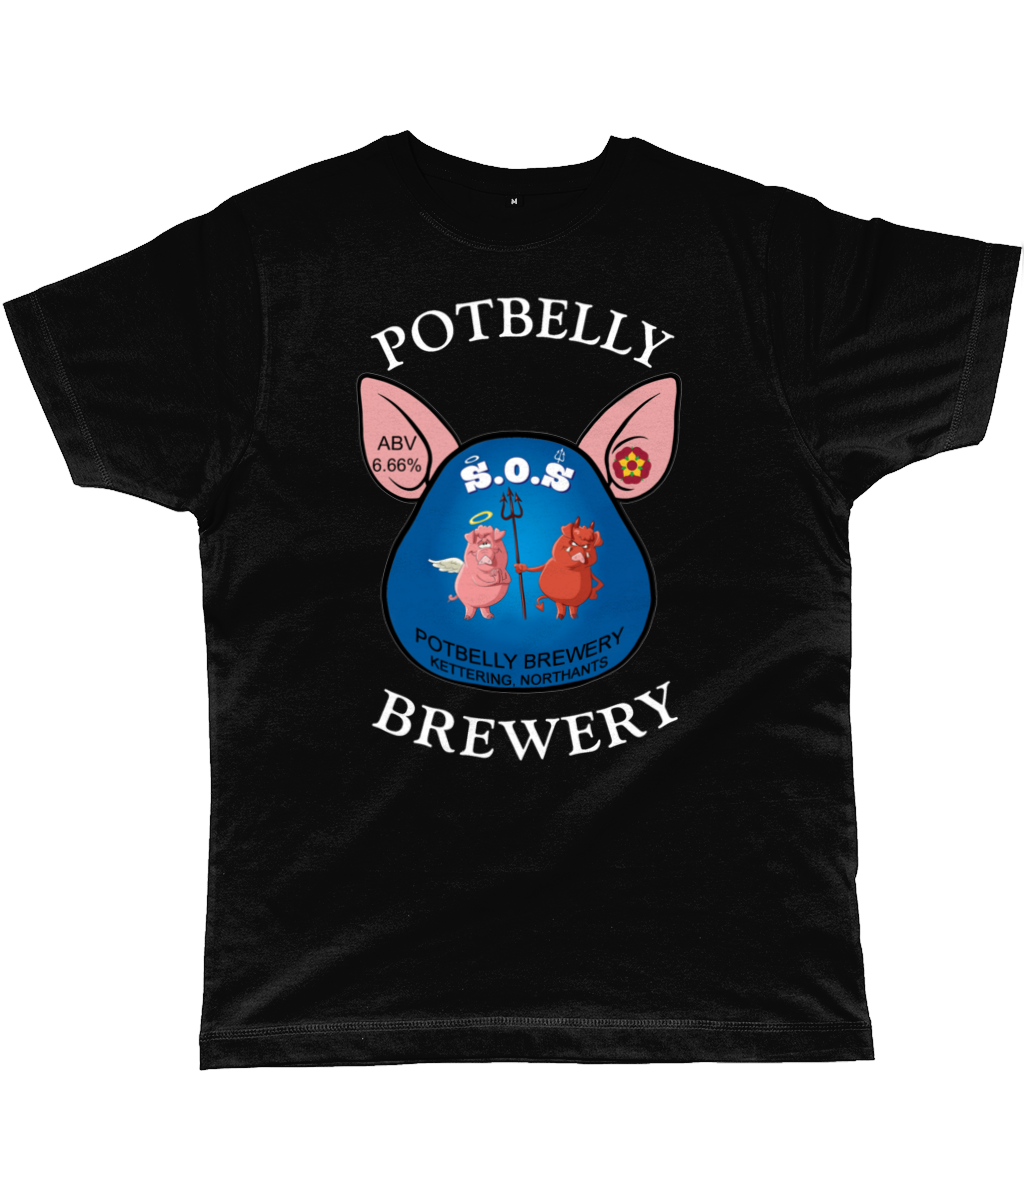 Potbelly Brewery SOS Pump Clip with Wording Classic Cut Men's T-Shirt